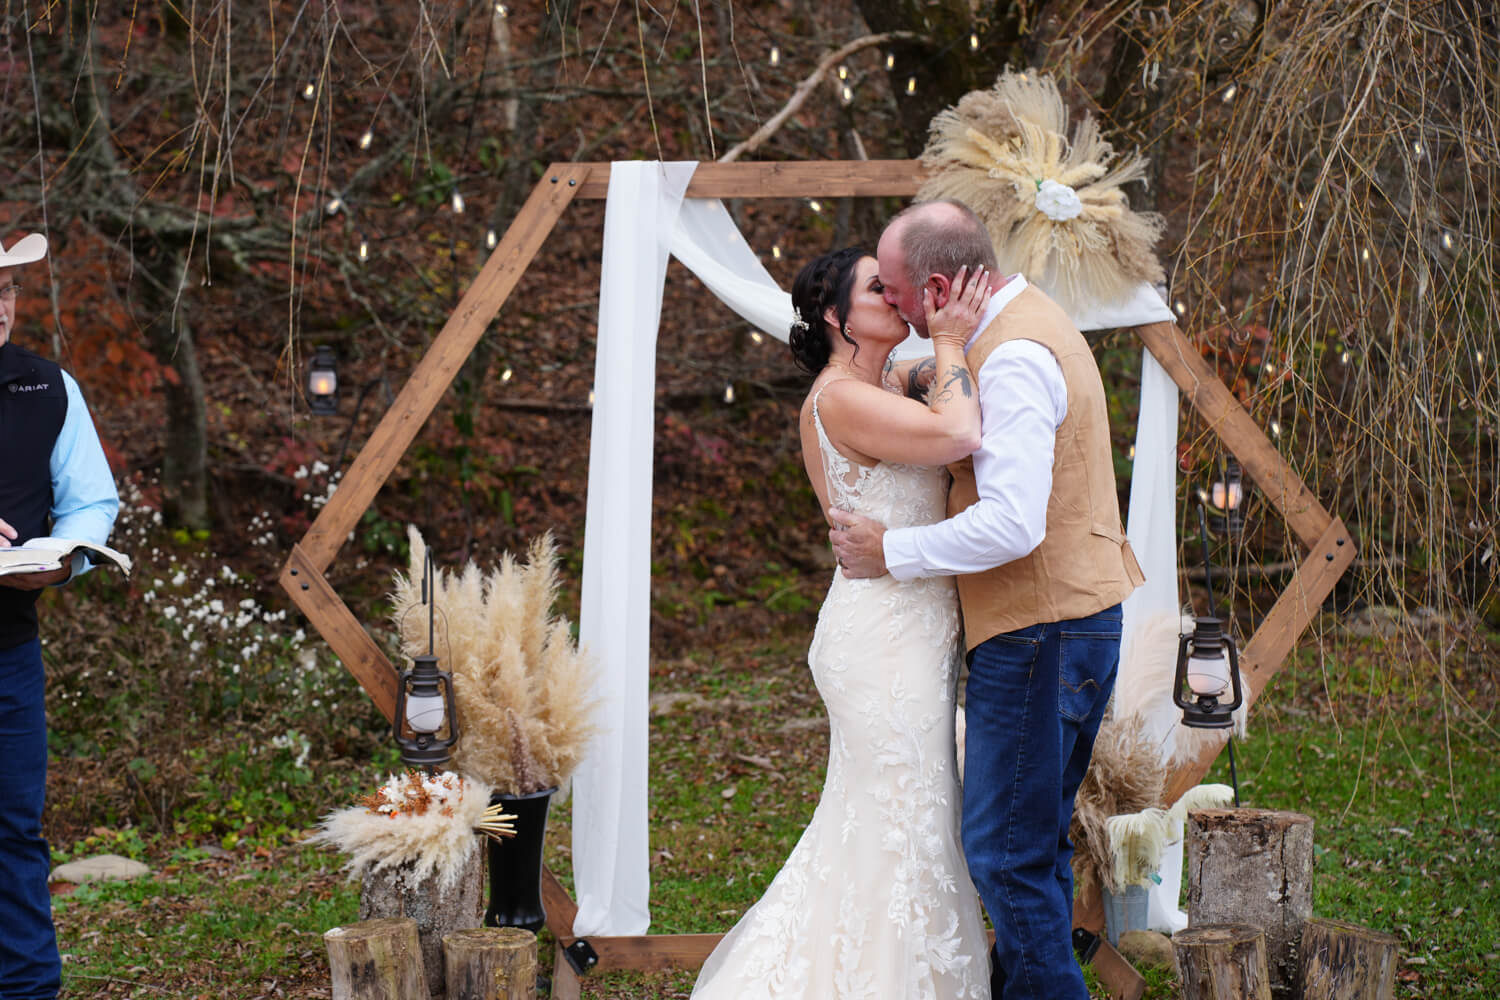 Wedding couple kissing in front of a hexagon arbor decorating with pampas grasses boho style